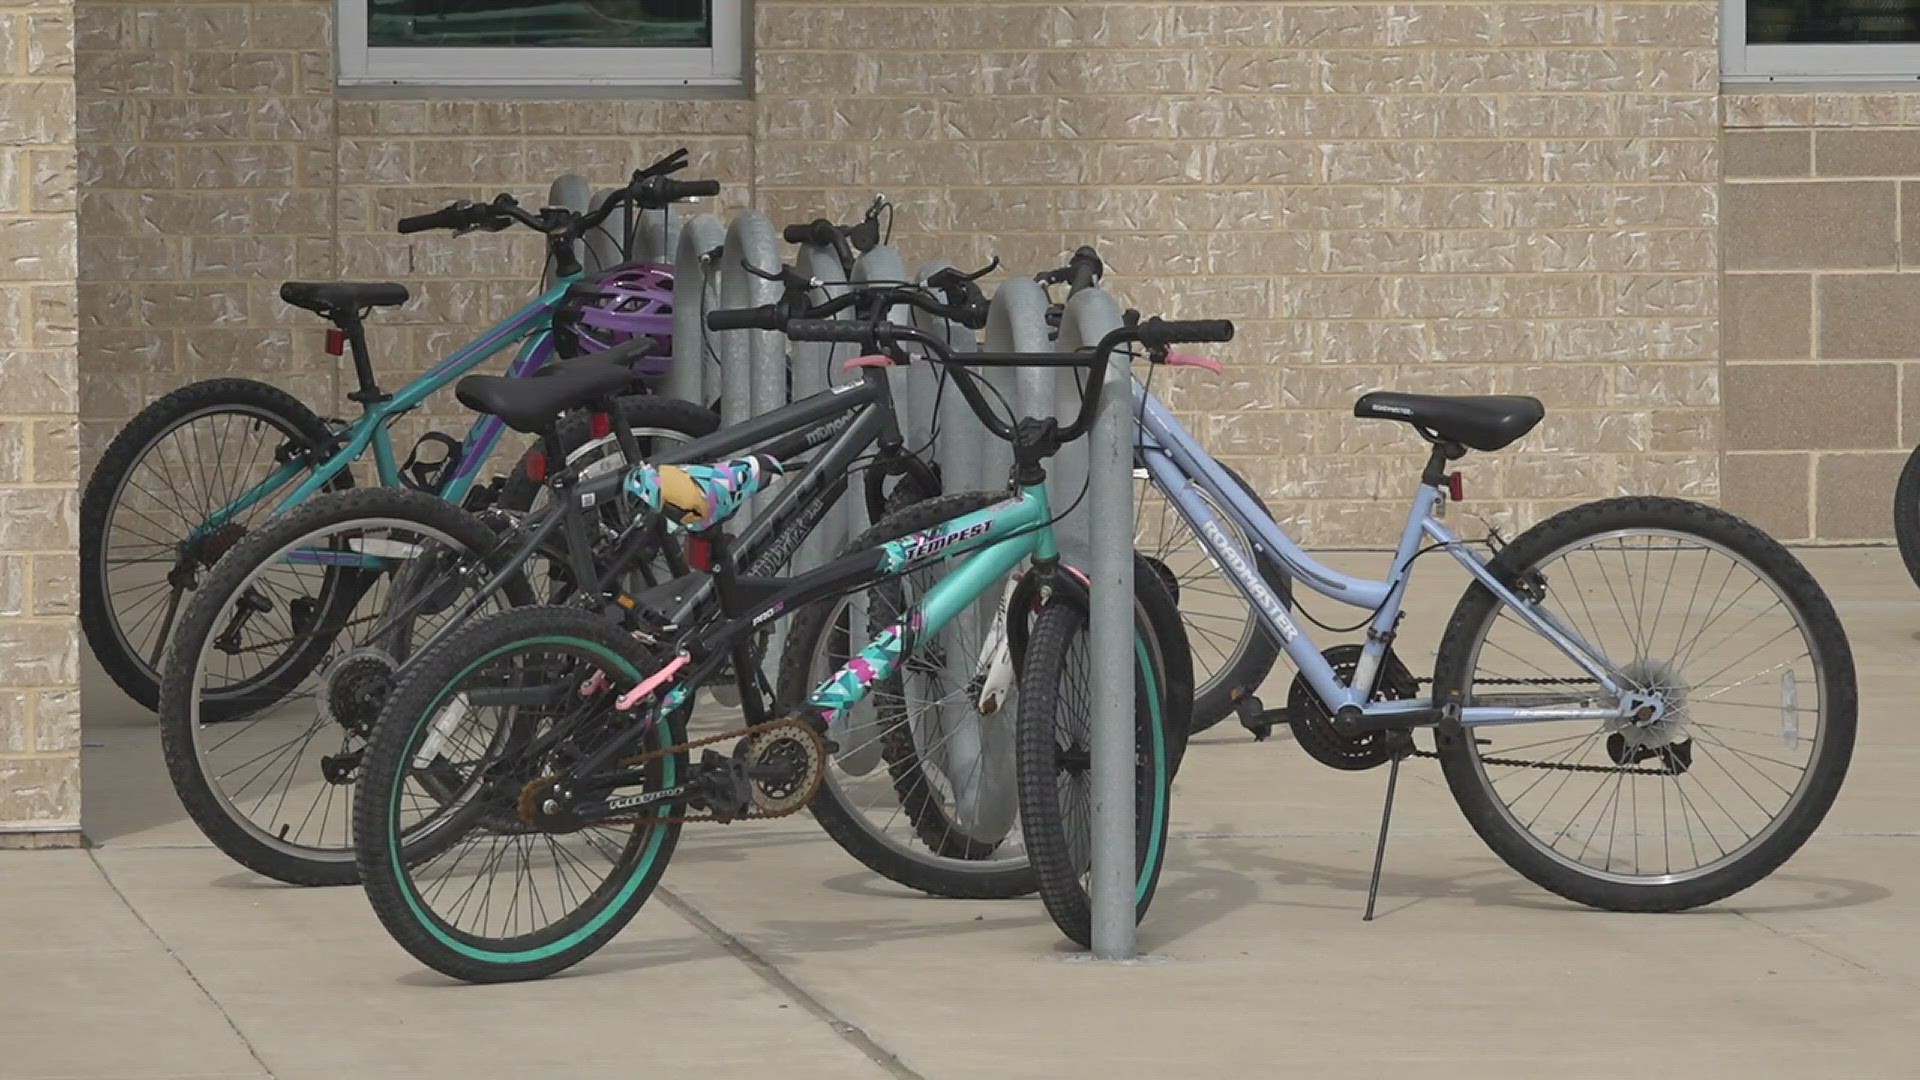 10-year-old Lillie Hernandez was on her way to school when her bike started to have some trouble.